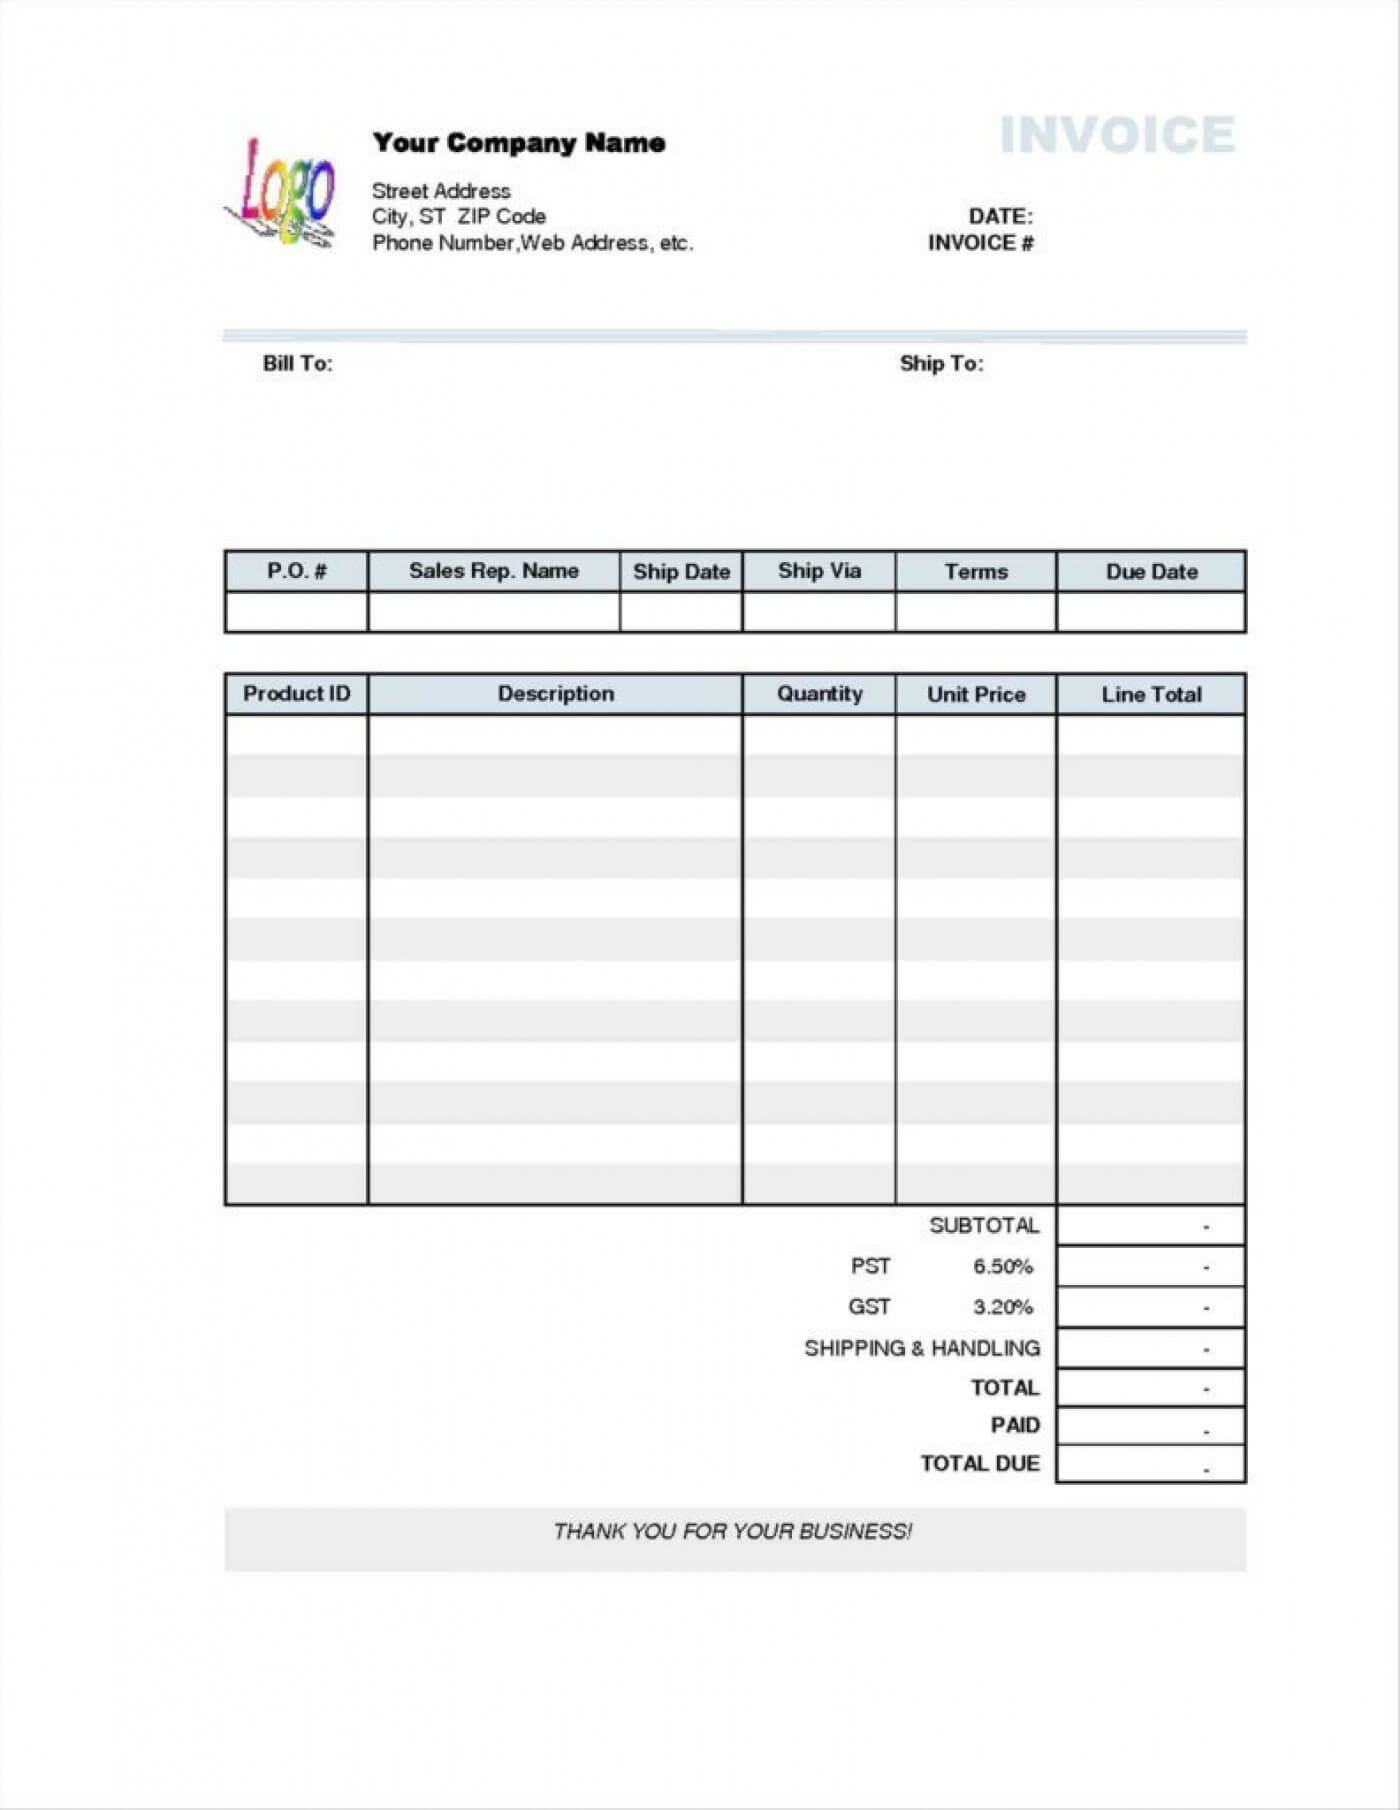 021 Credit Card Receipt Template Ideas Invoice With Payment In Credit Card Bill Template